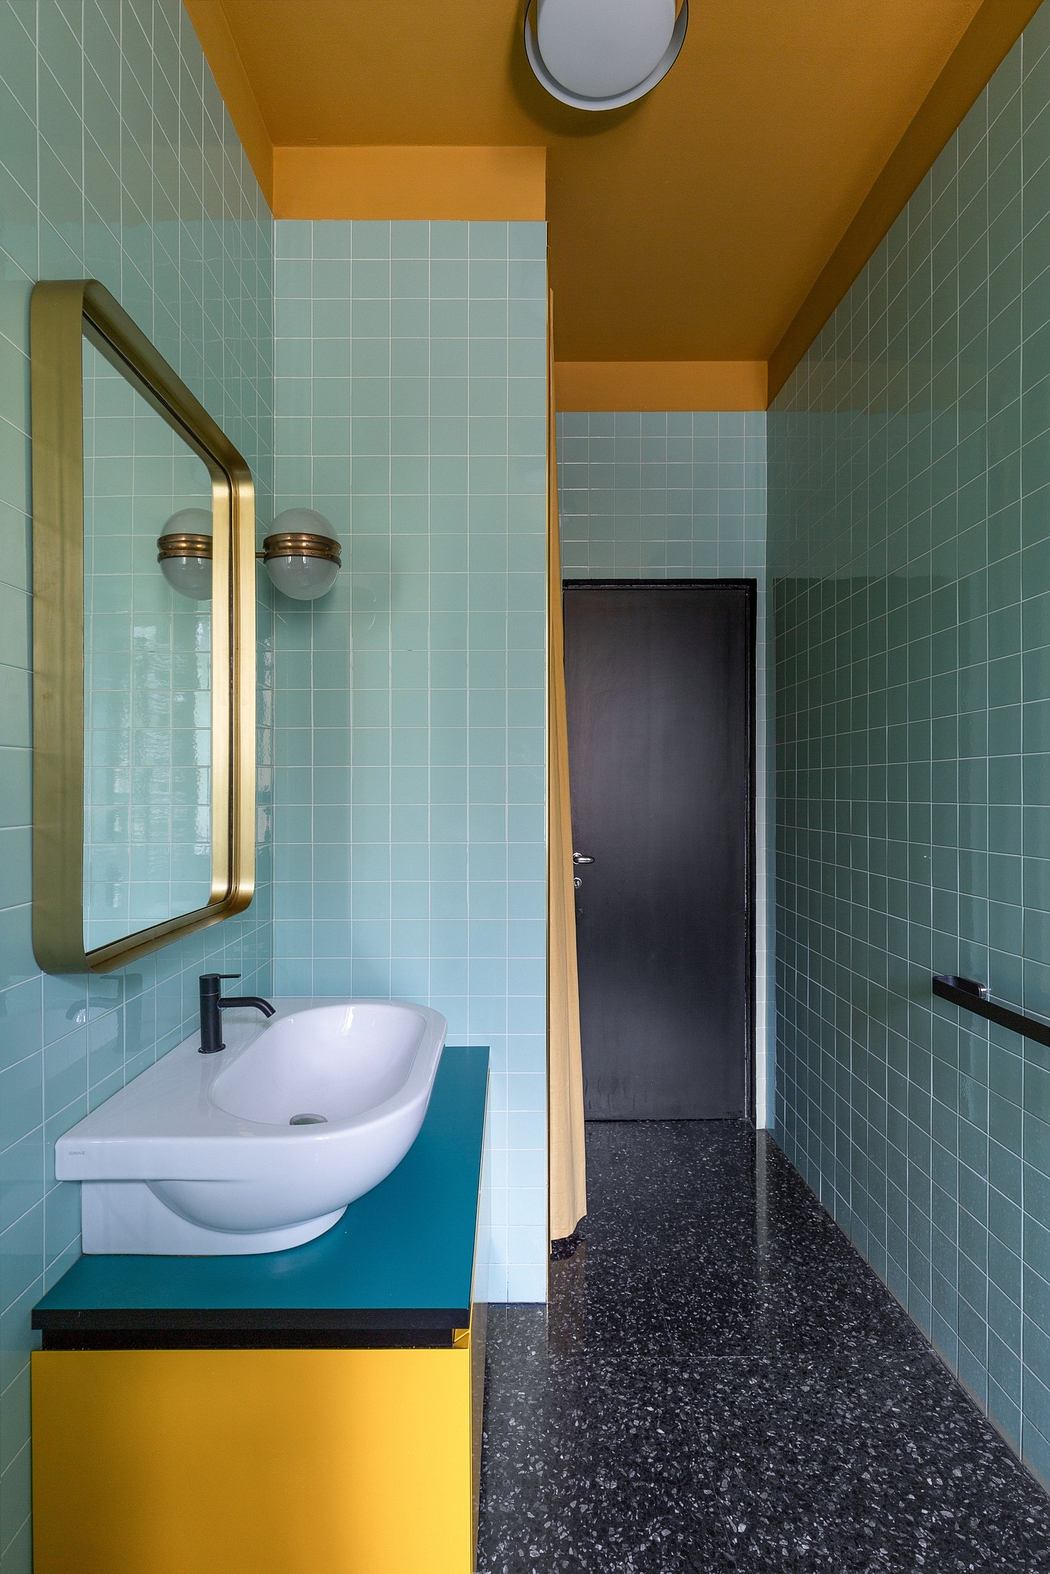 Modern bathroom with blue tiles, yellow walls, and a terrazzo floor.